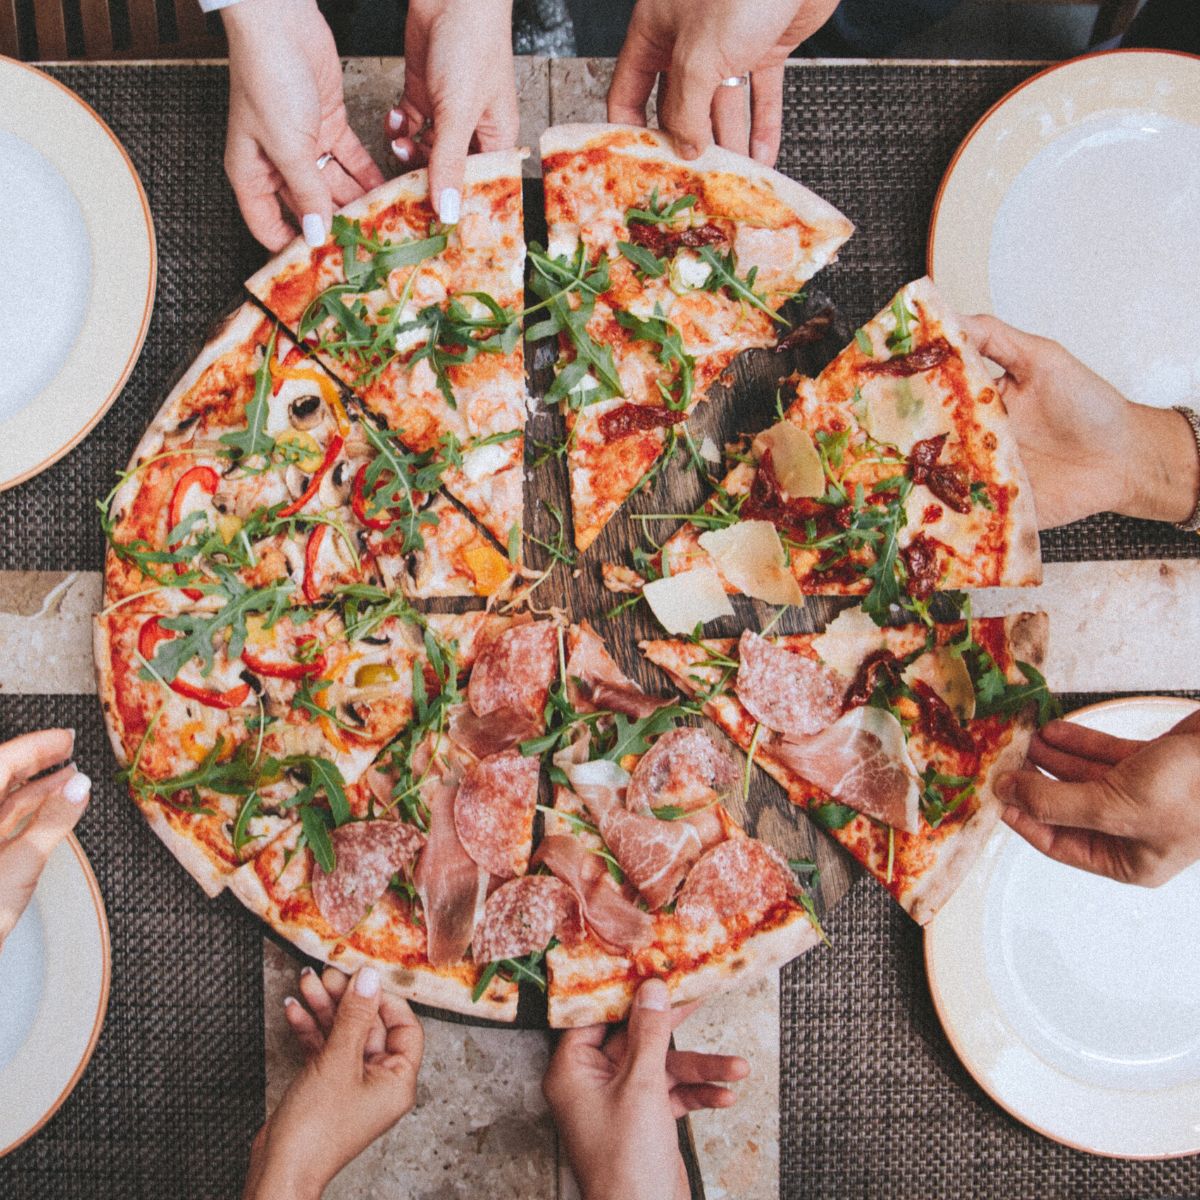 Hands reaching in to take slices of pizza on a family table.